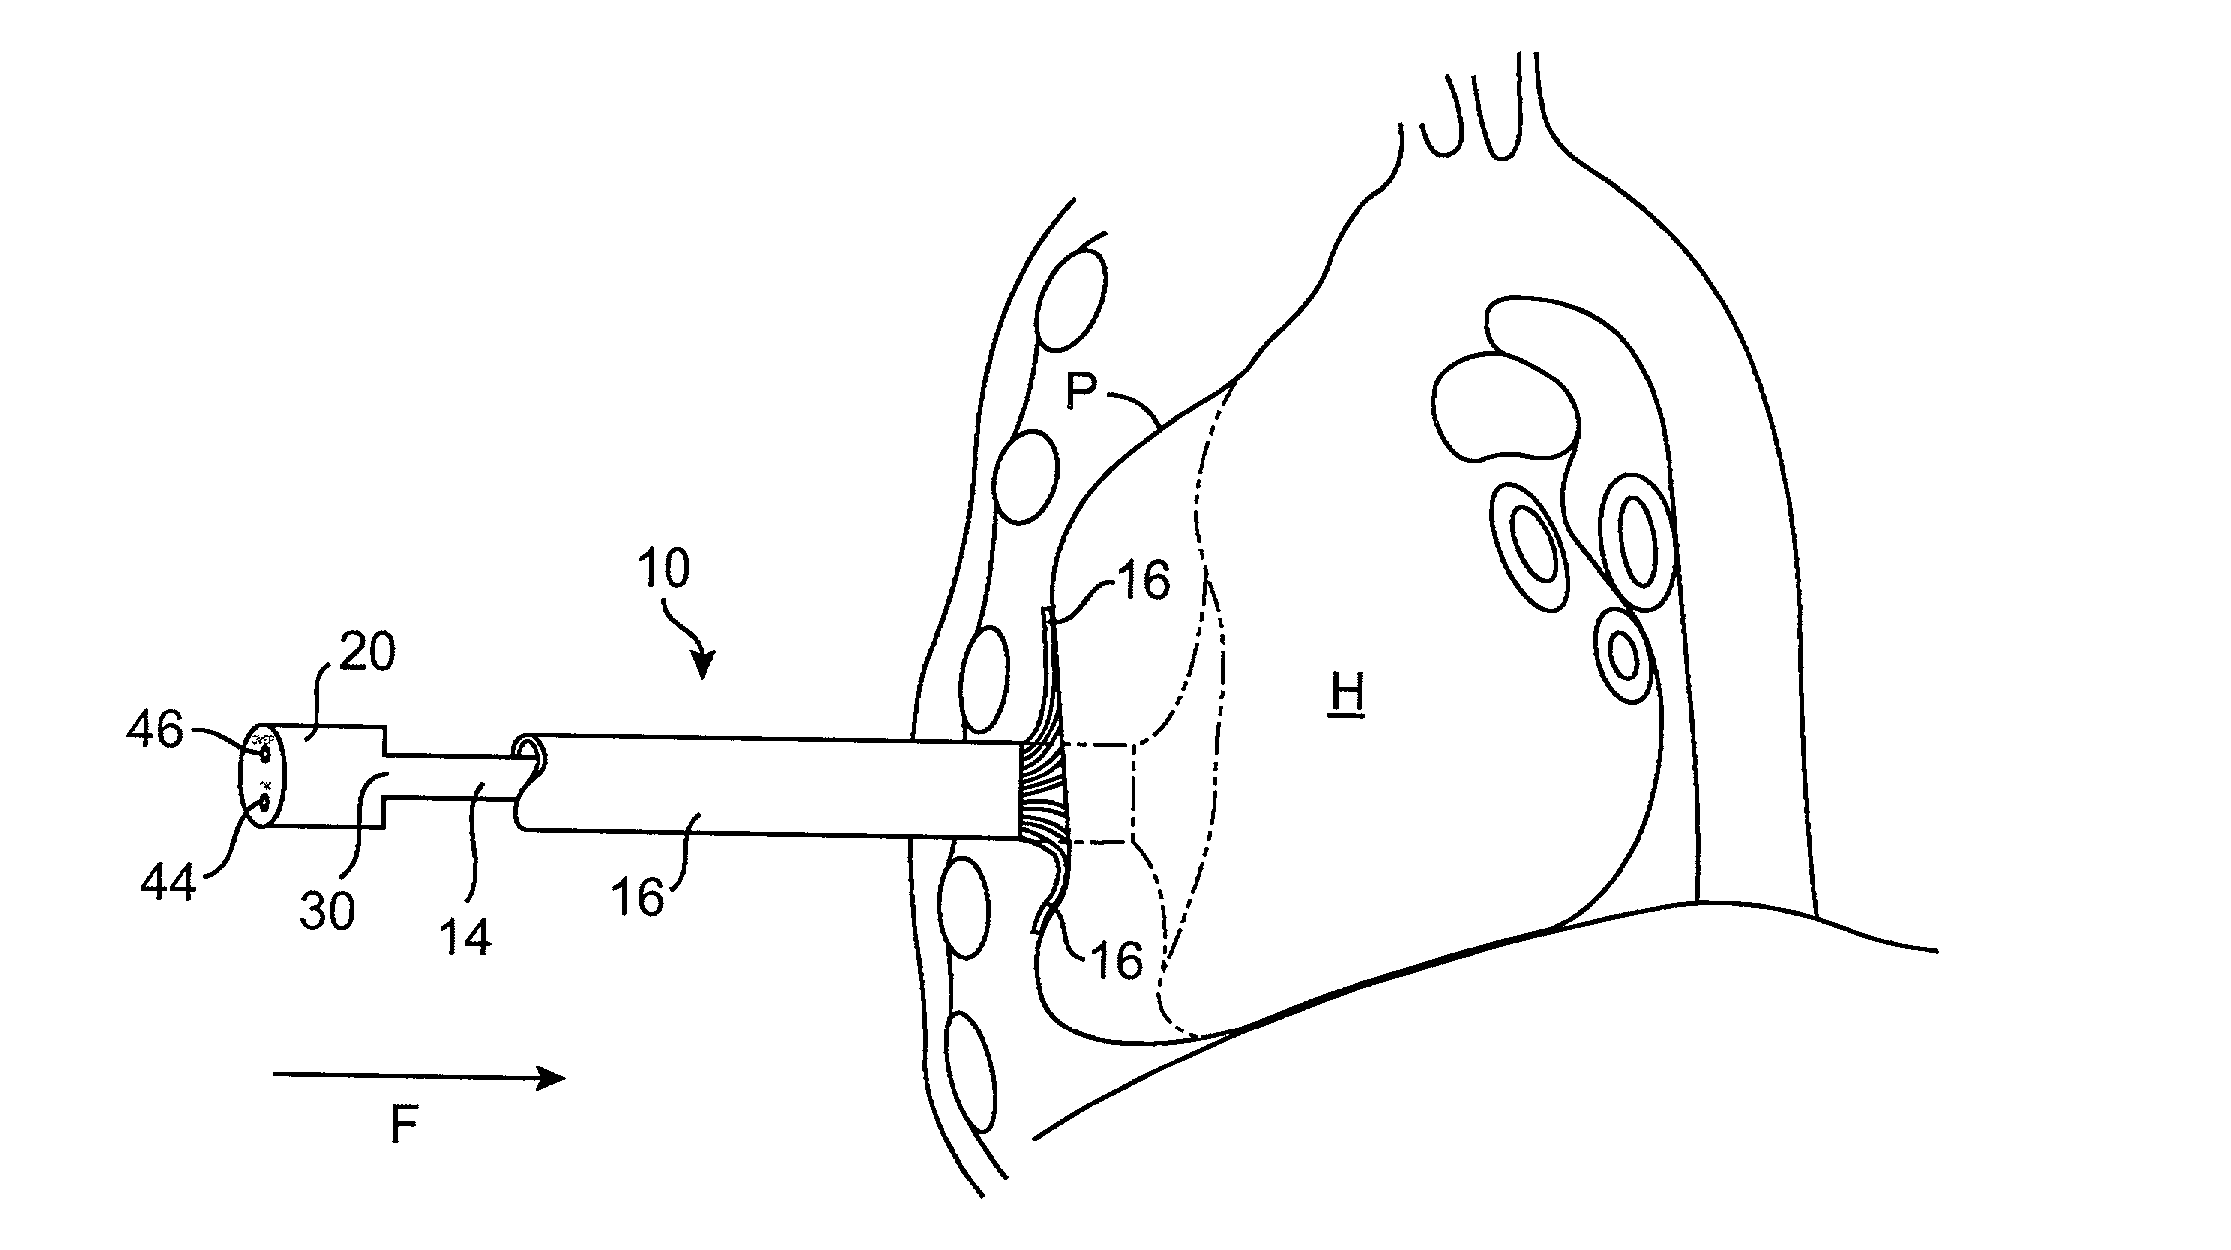 Apparatus and method for monitoring performance of minimally invasive direct cardiac compression